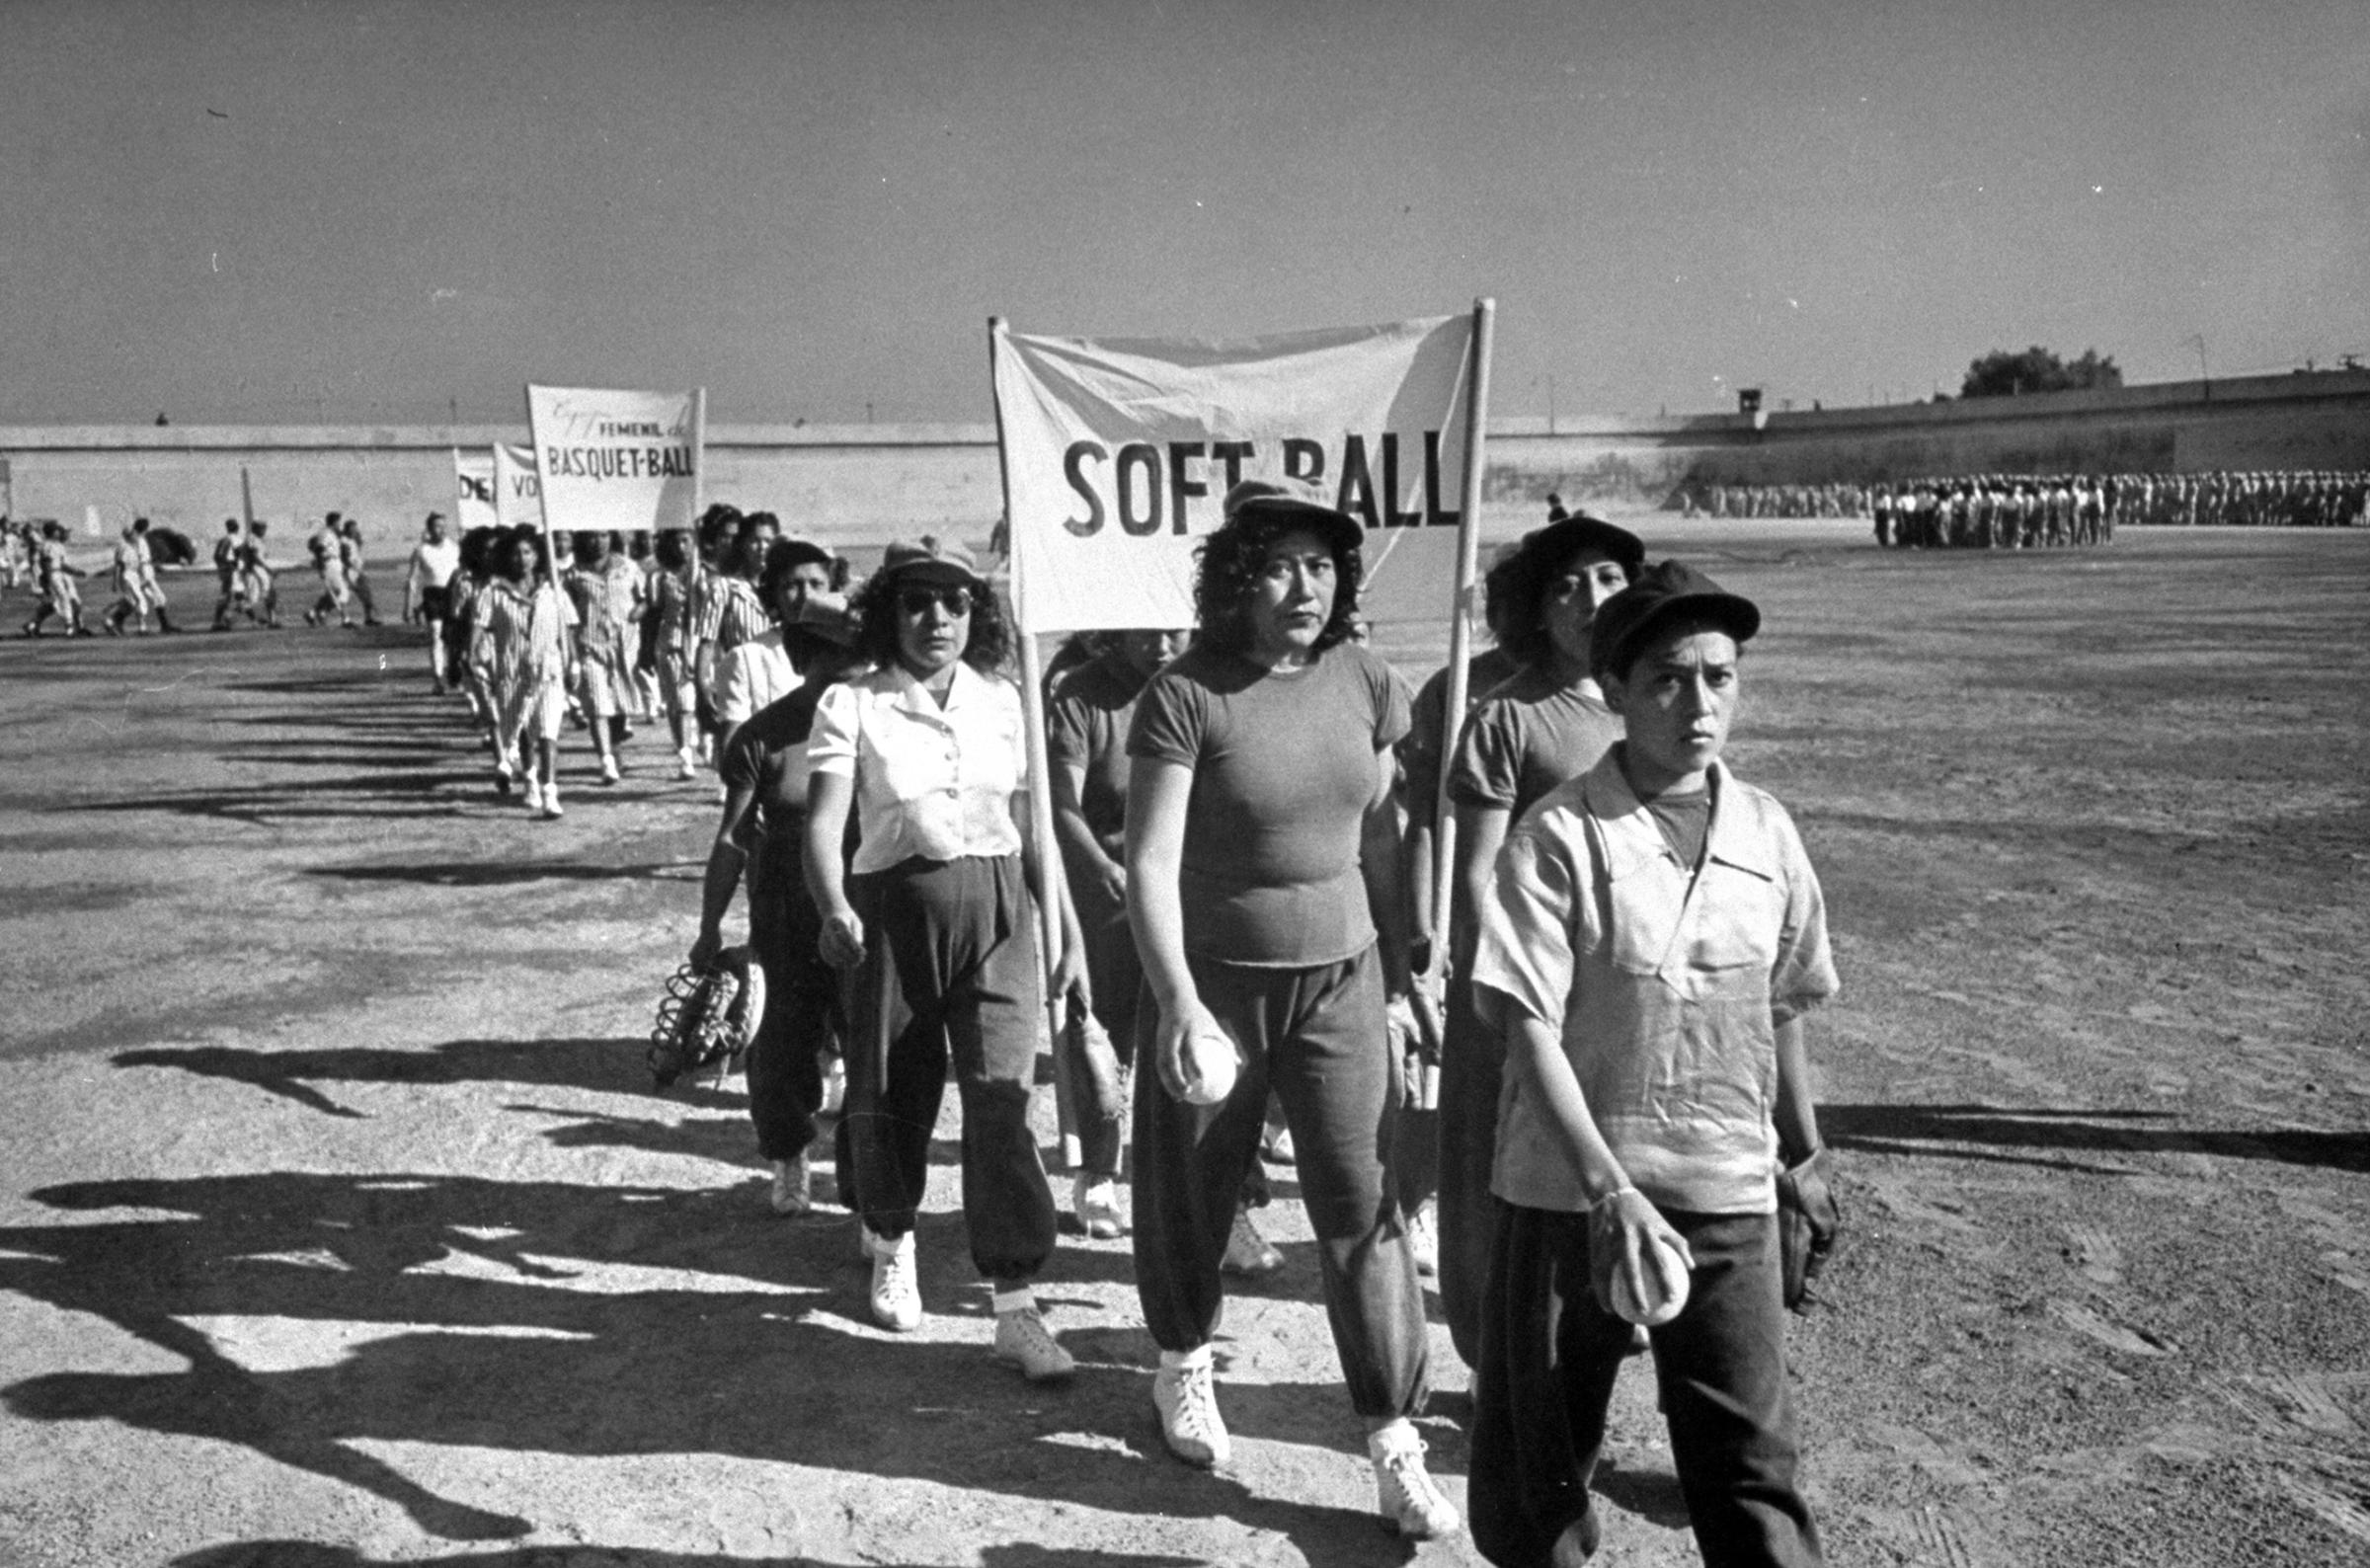 Prison athletes, led by women, parade around the athletic field. They play intramural games and also meet teams from a Mexico City normal school.